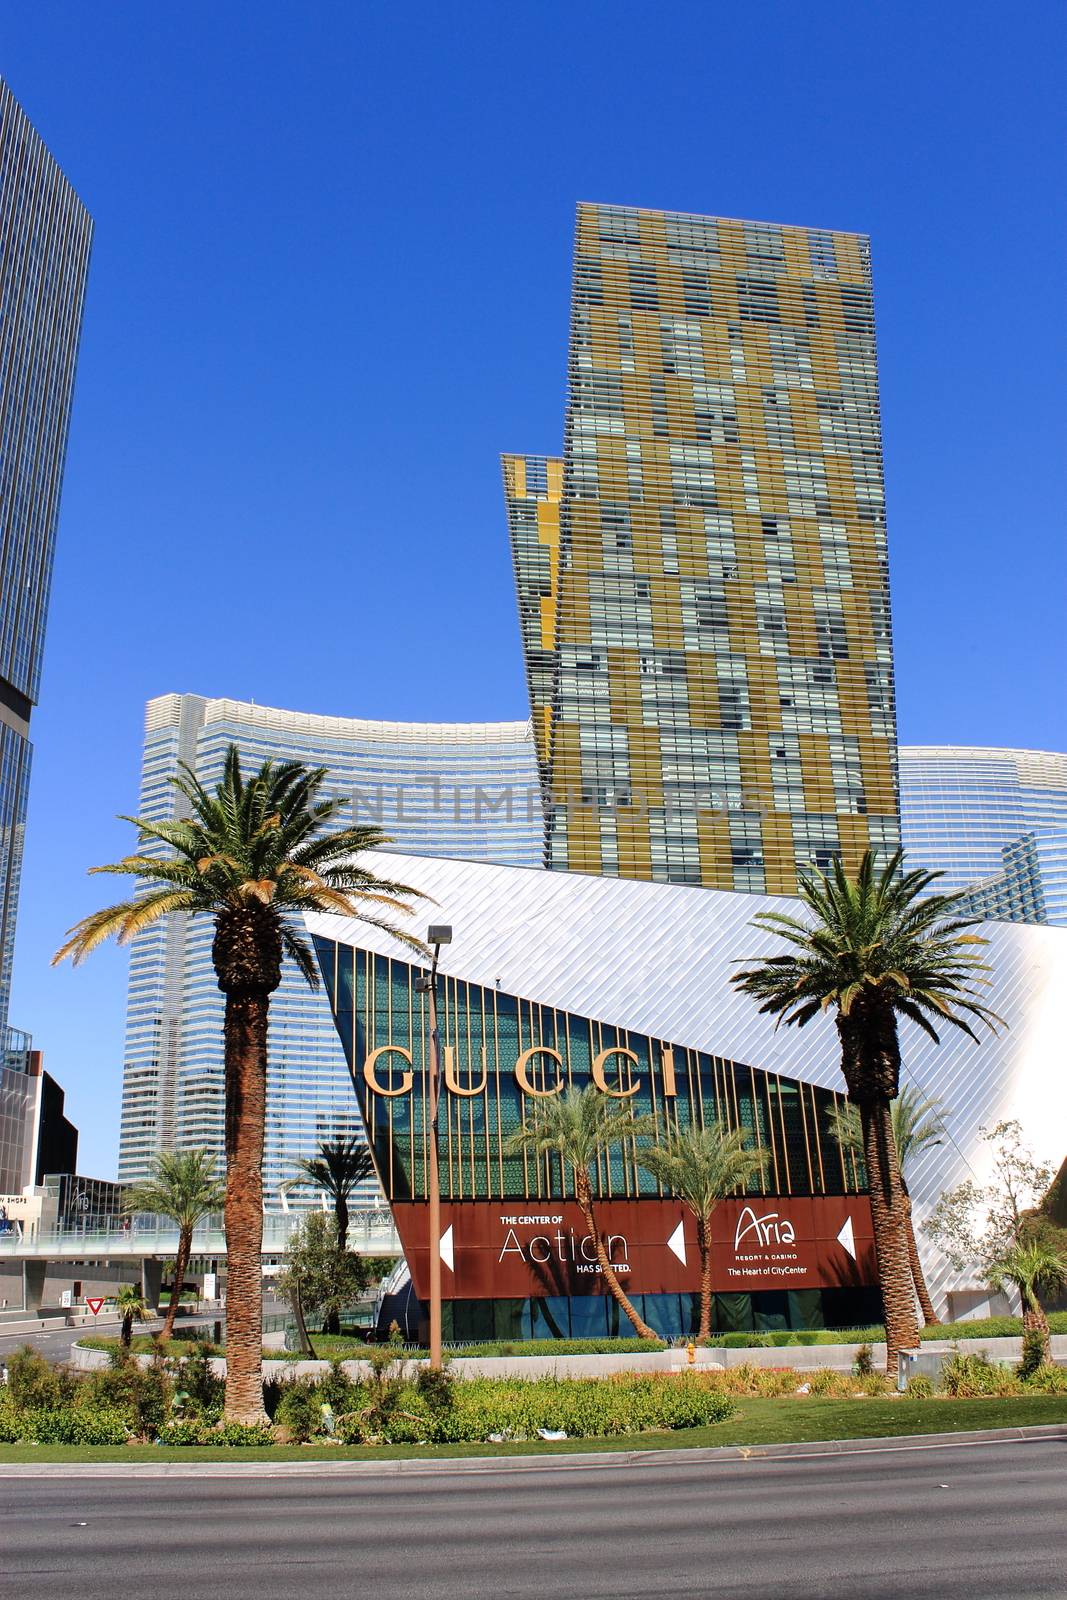 Las Vegas Gucci Store by Ffooter